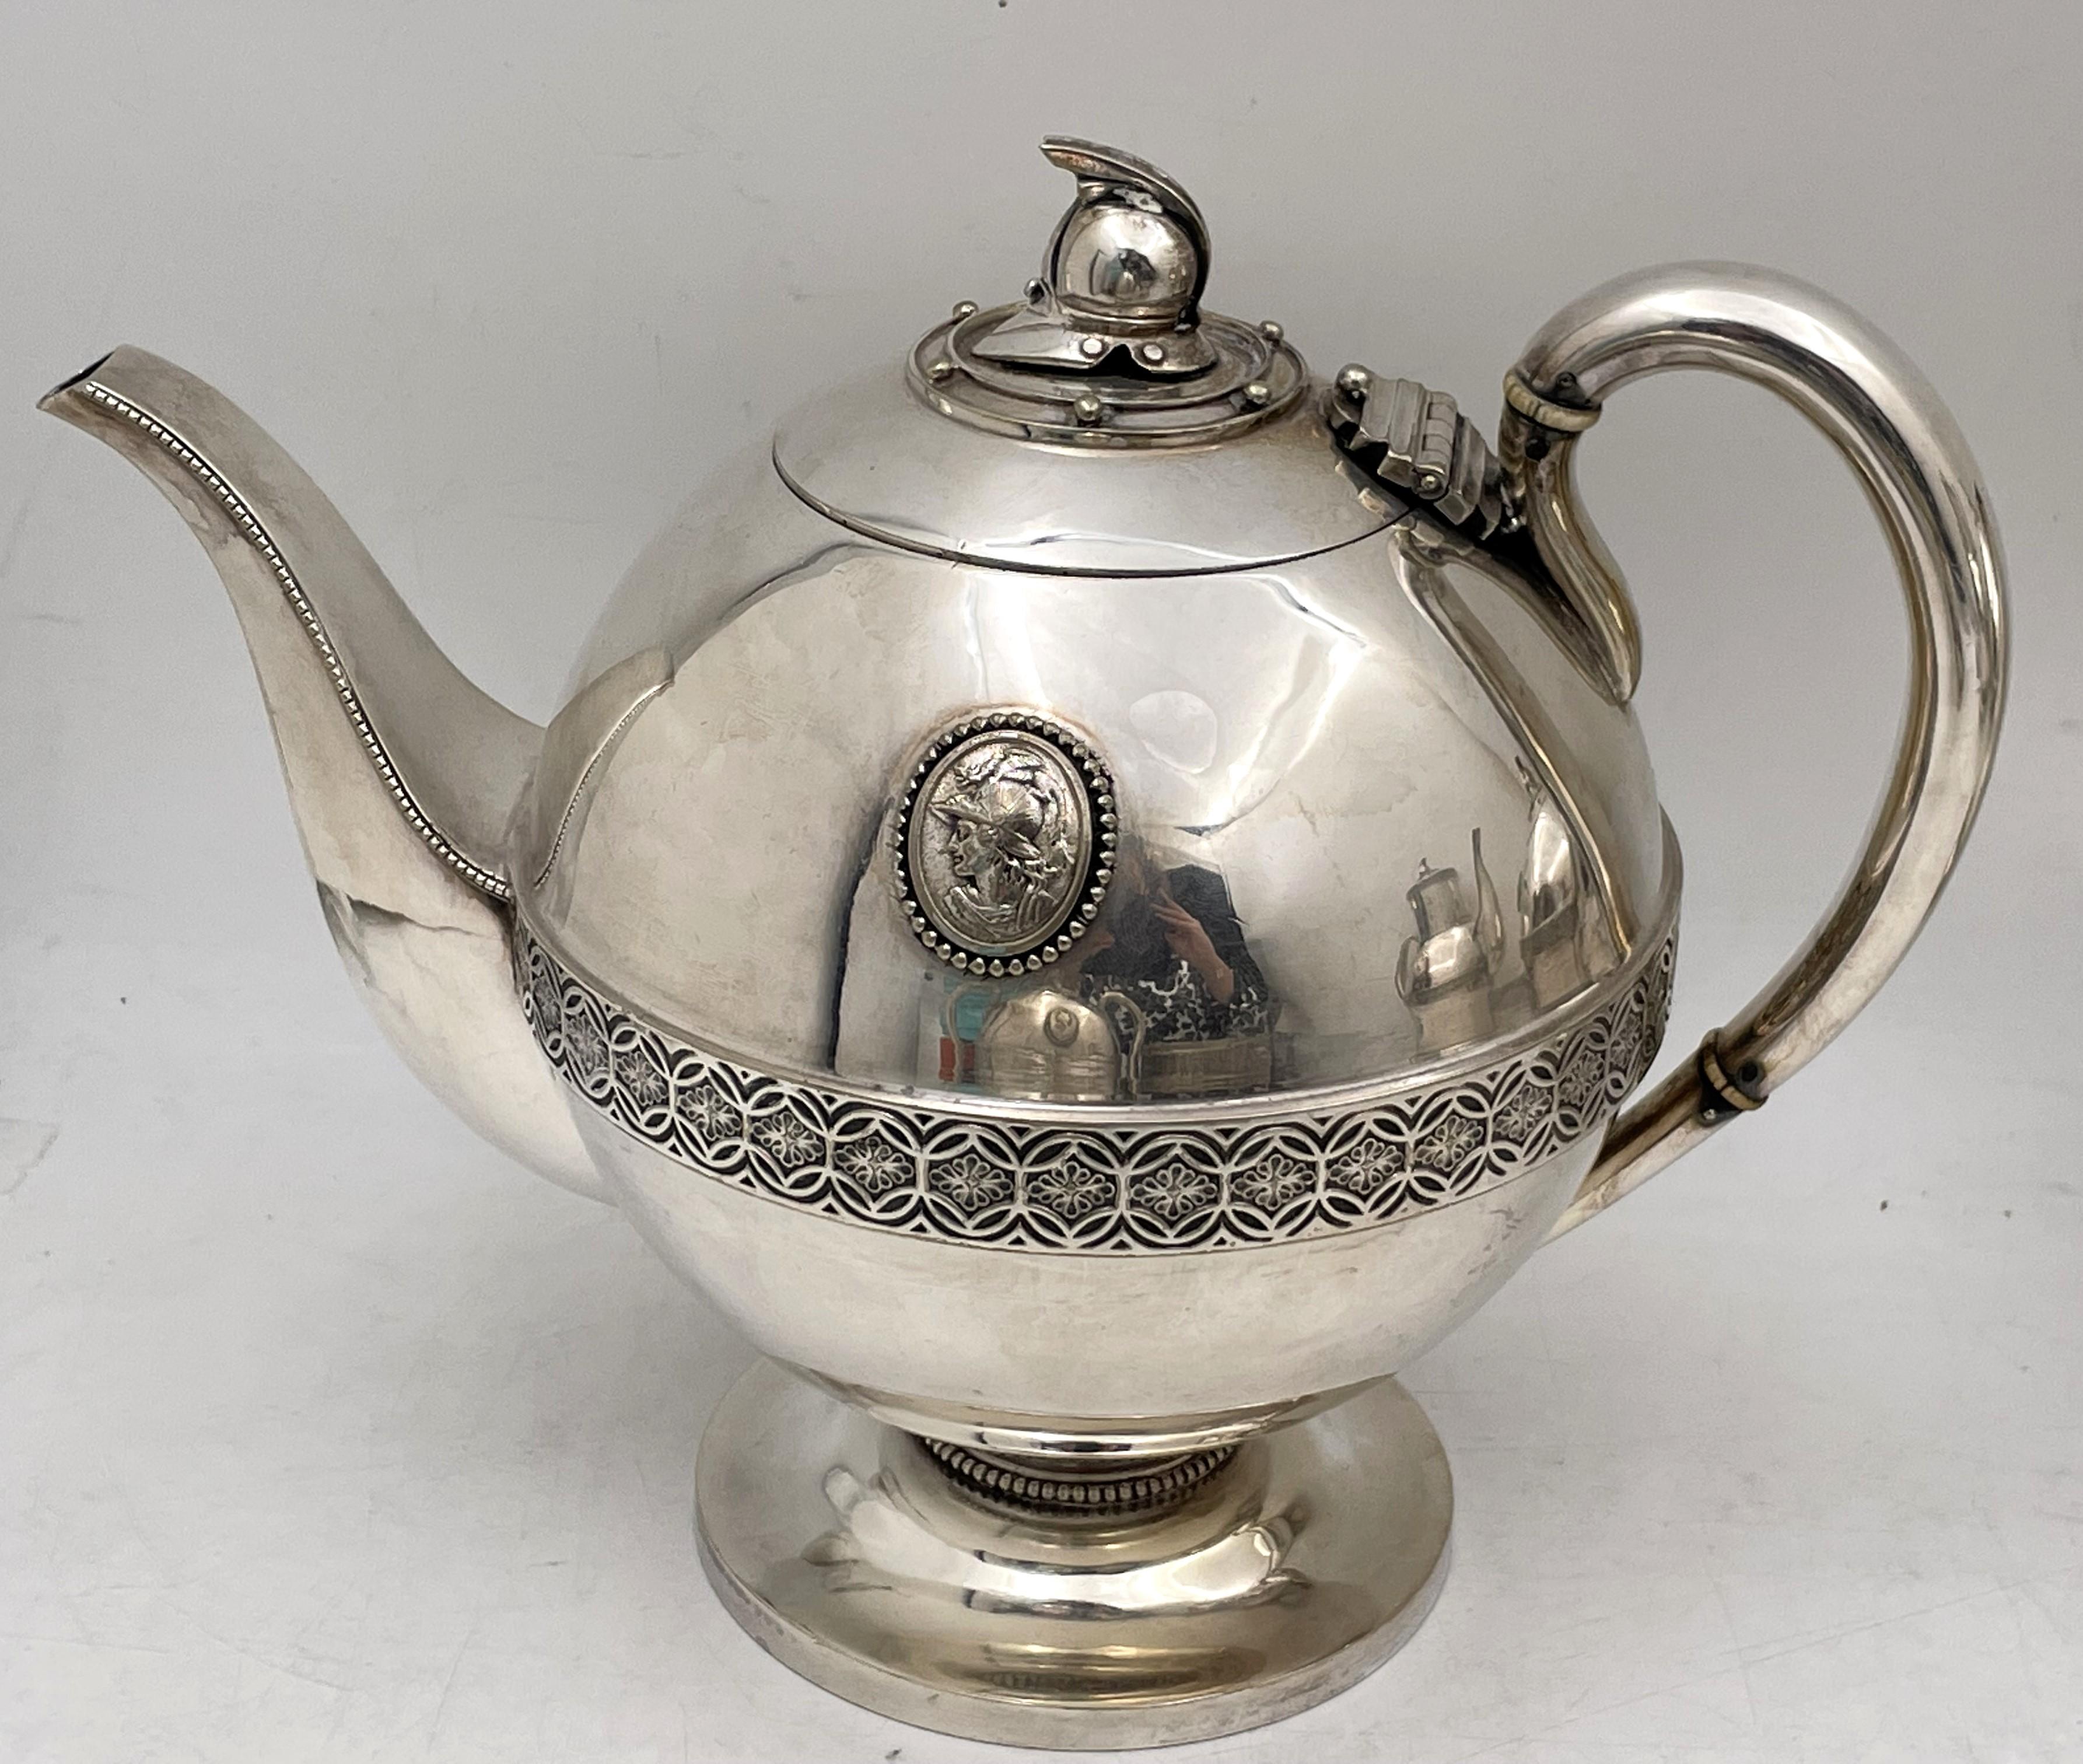 Haughwout & Co. Silver Helmet Medallion 5-Piece 19th Century Tea Coffee Set In Good Condition For Sale In New York, NY